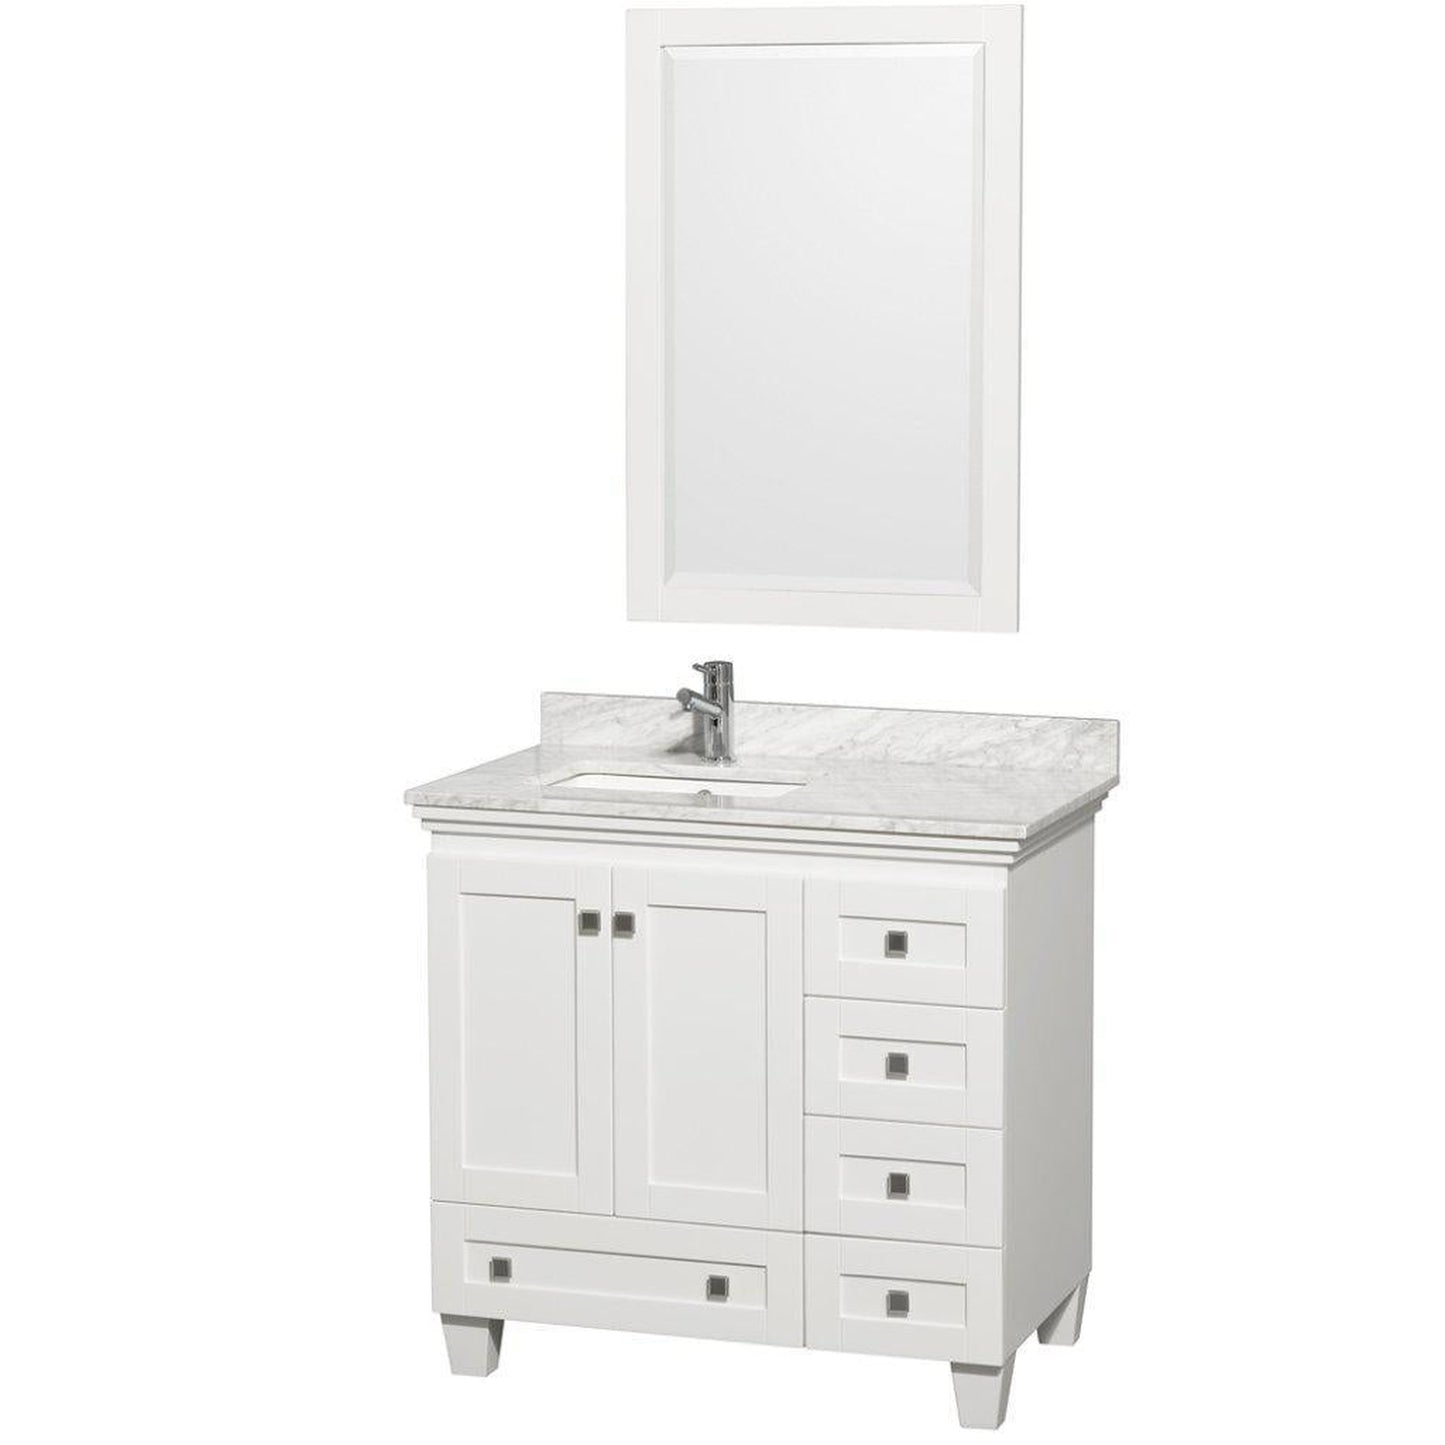 Wyndham Collection Acclaim 36" Single Bathroom White Vanity Set With White Carrara Marble Countertop, Undermount Square Sink, and 24" Mirror